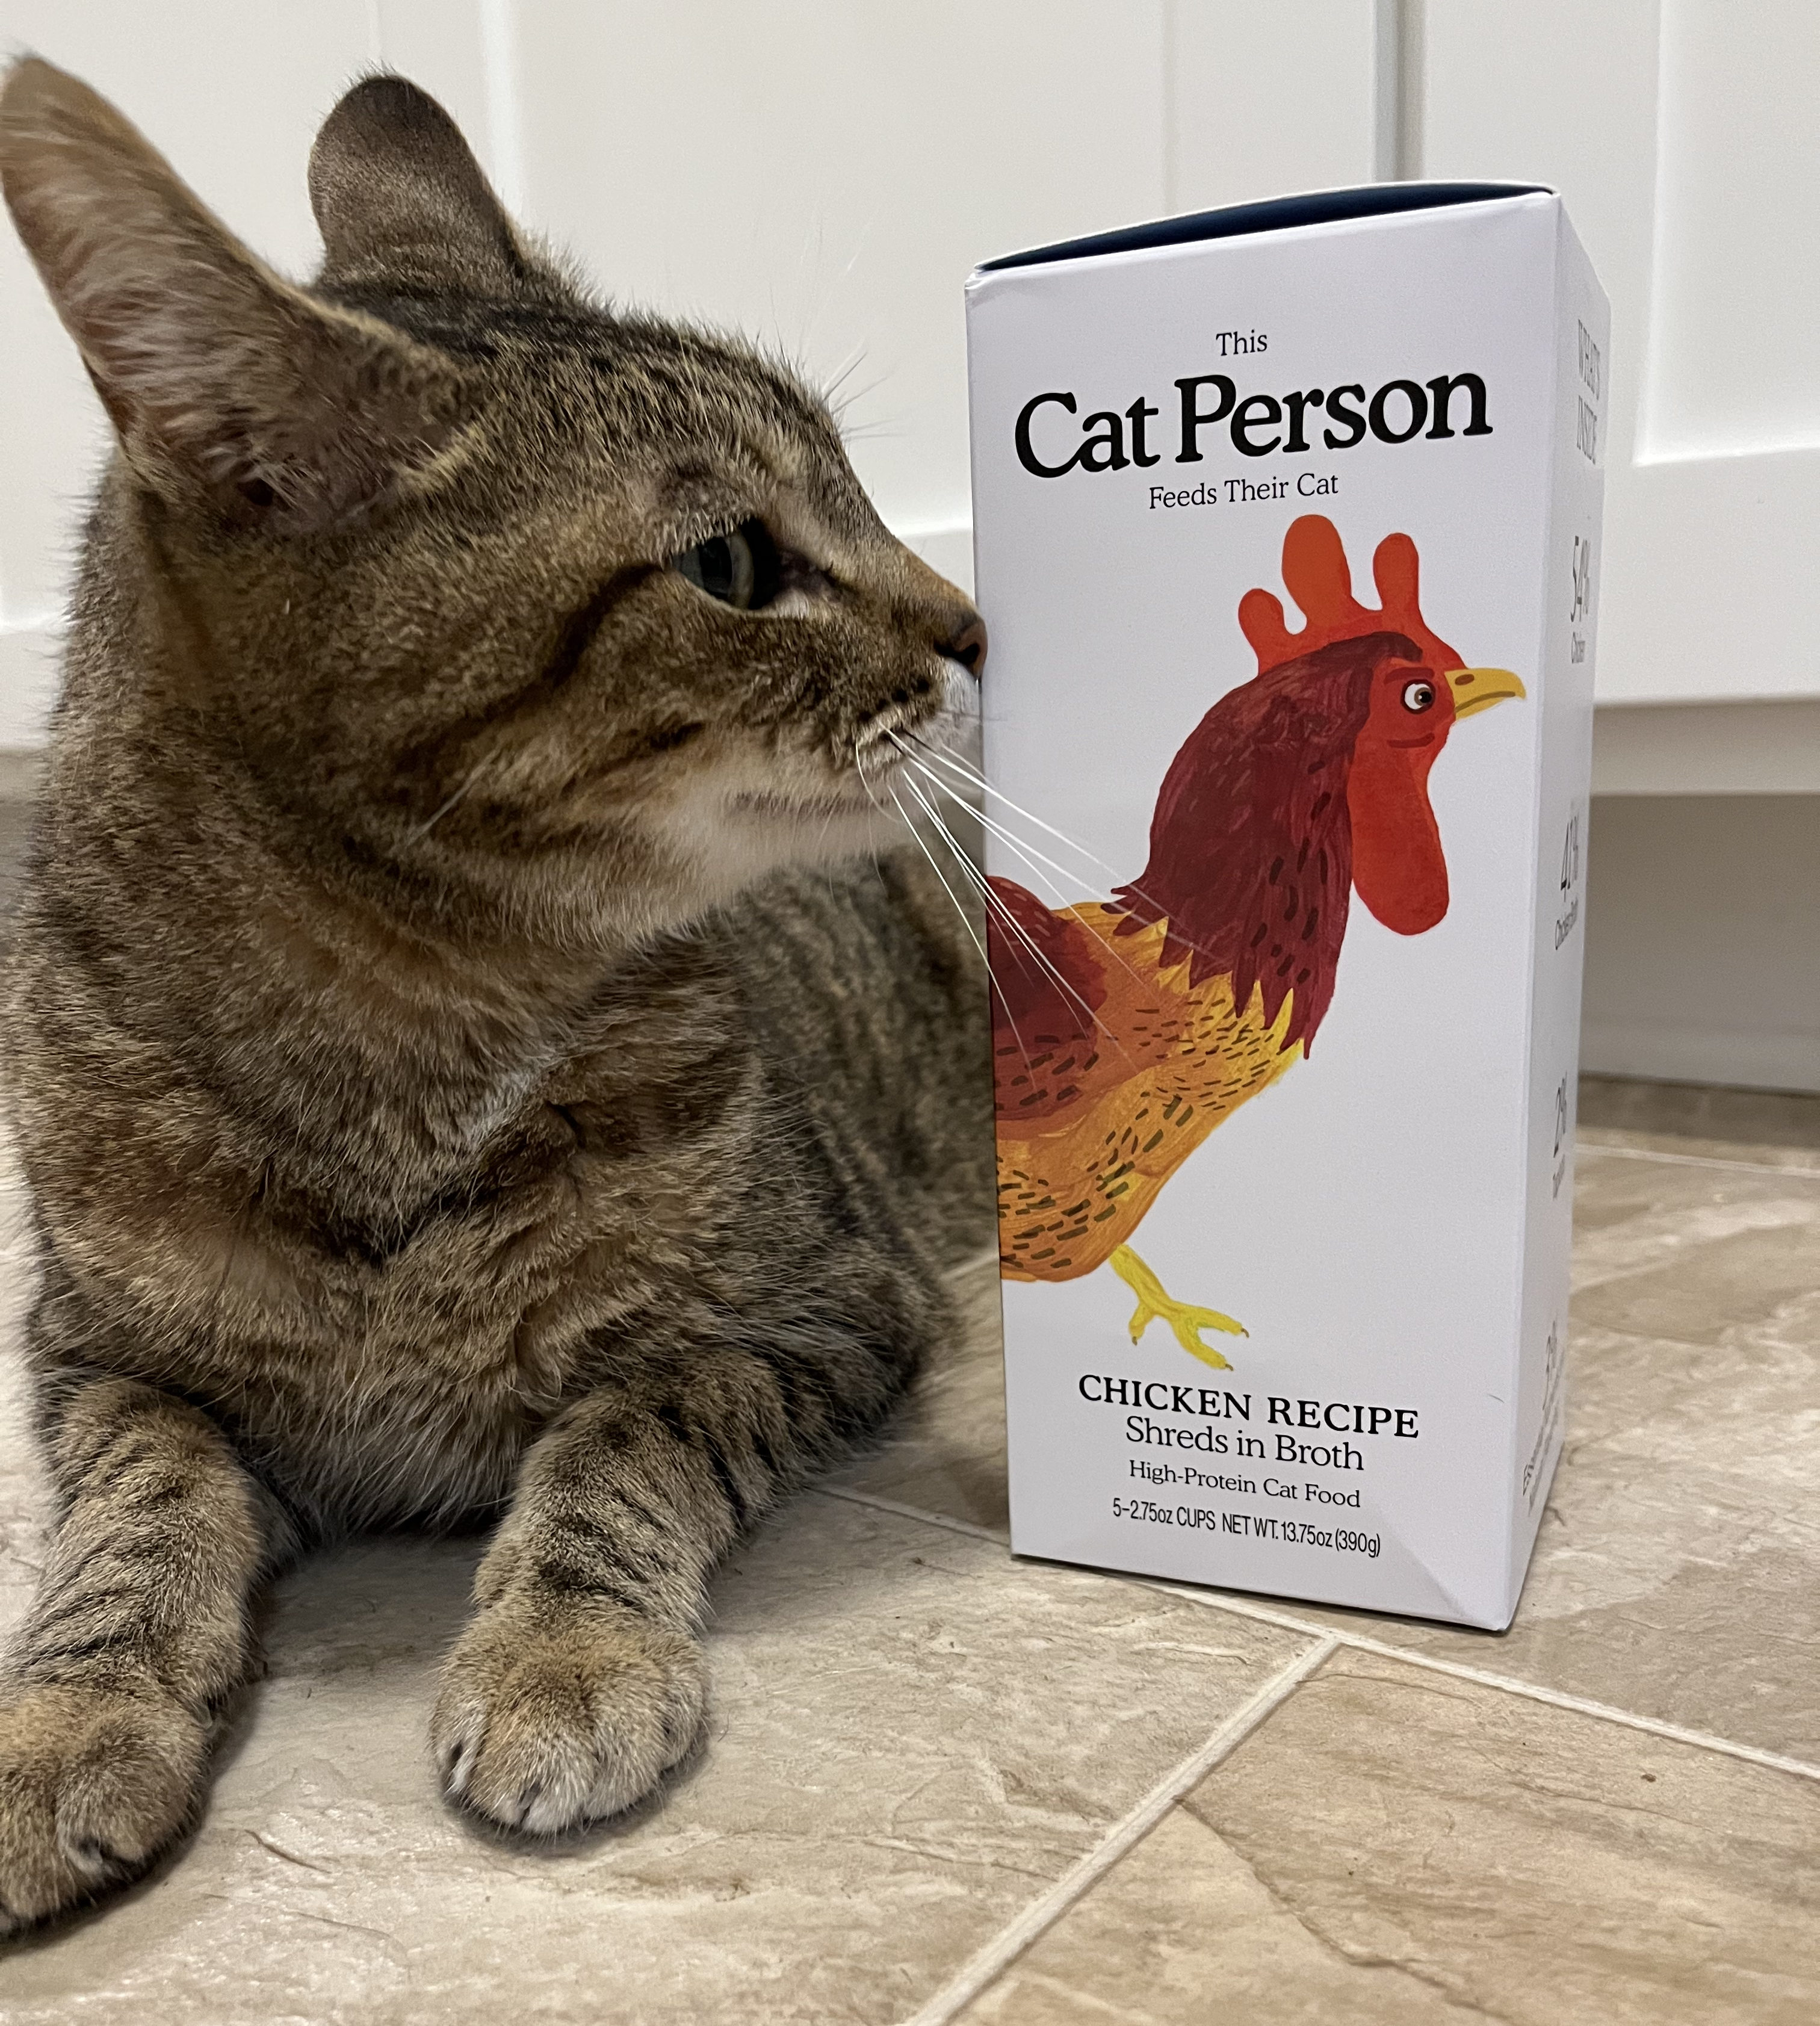 Why I’ll Never Have to Worry About My Cat’s Health After Getting This Cat Food